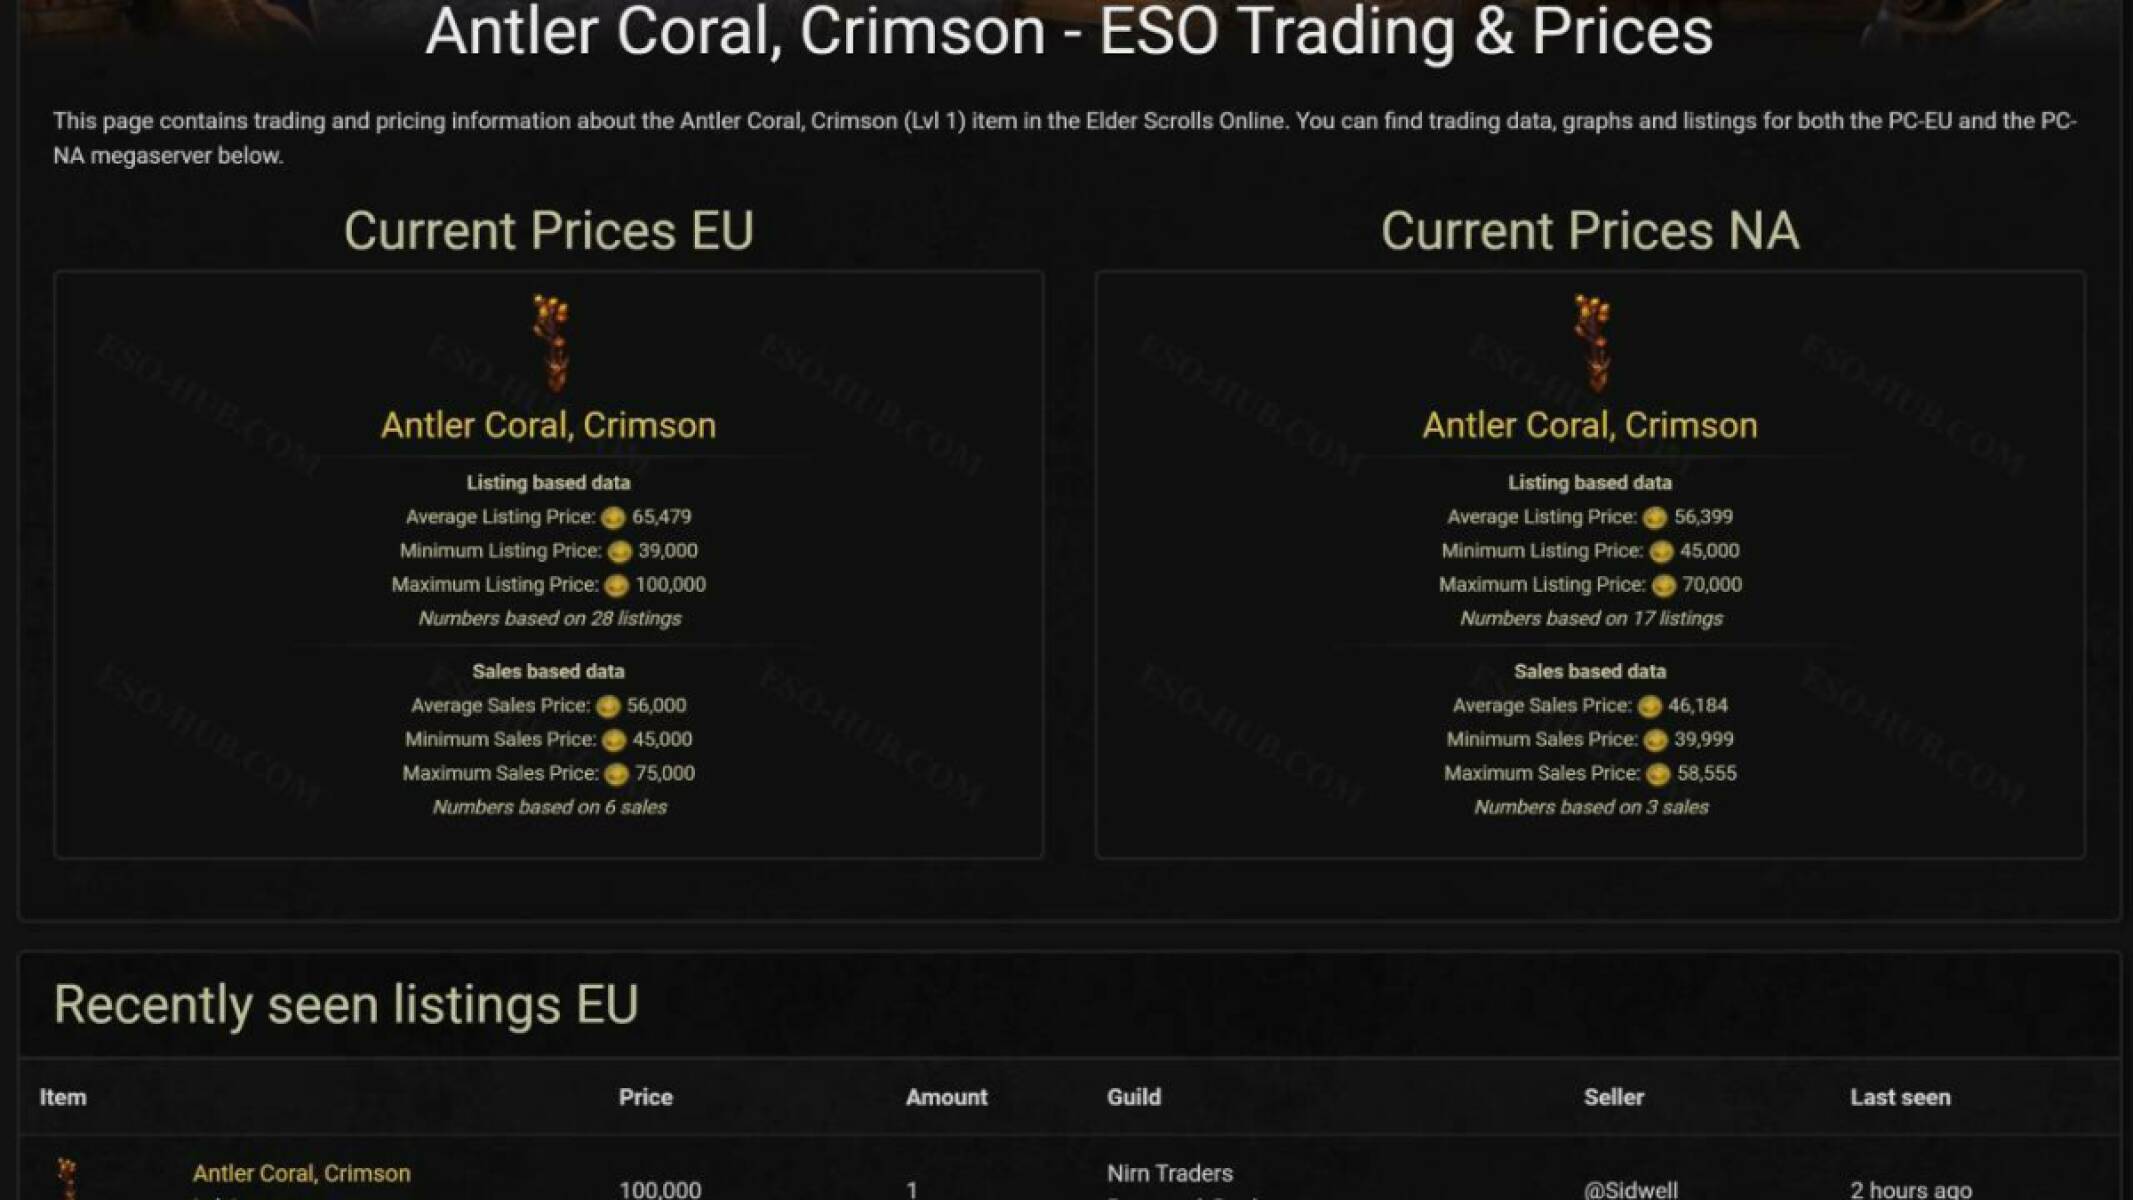 Pricing Data from the ESO Market Trade Center